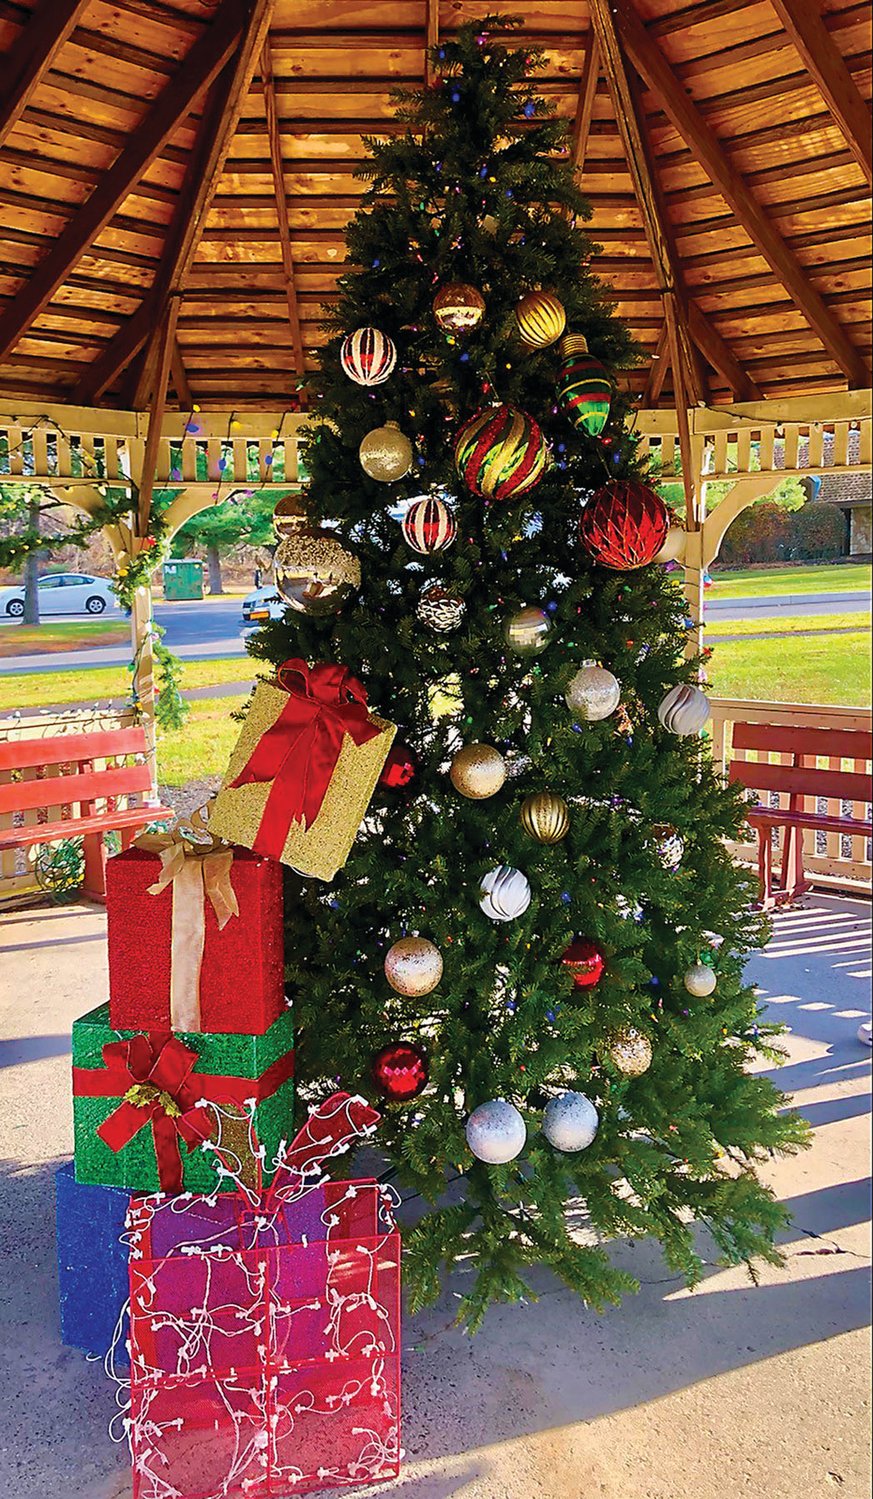 Woods Services’ Christmas tree, donated by Kent’s Tree Service in Levittown.